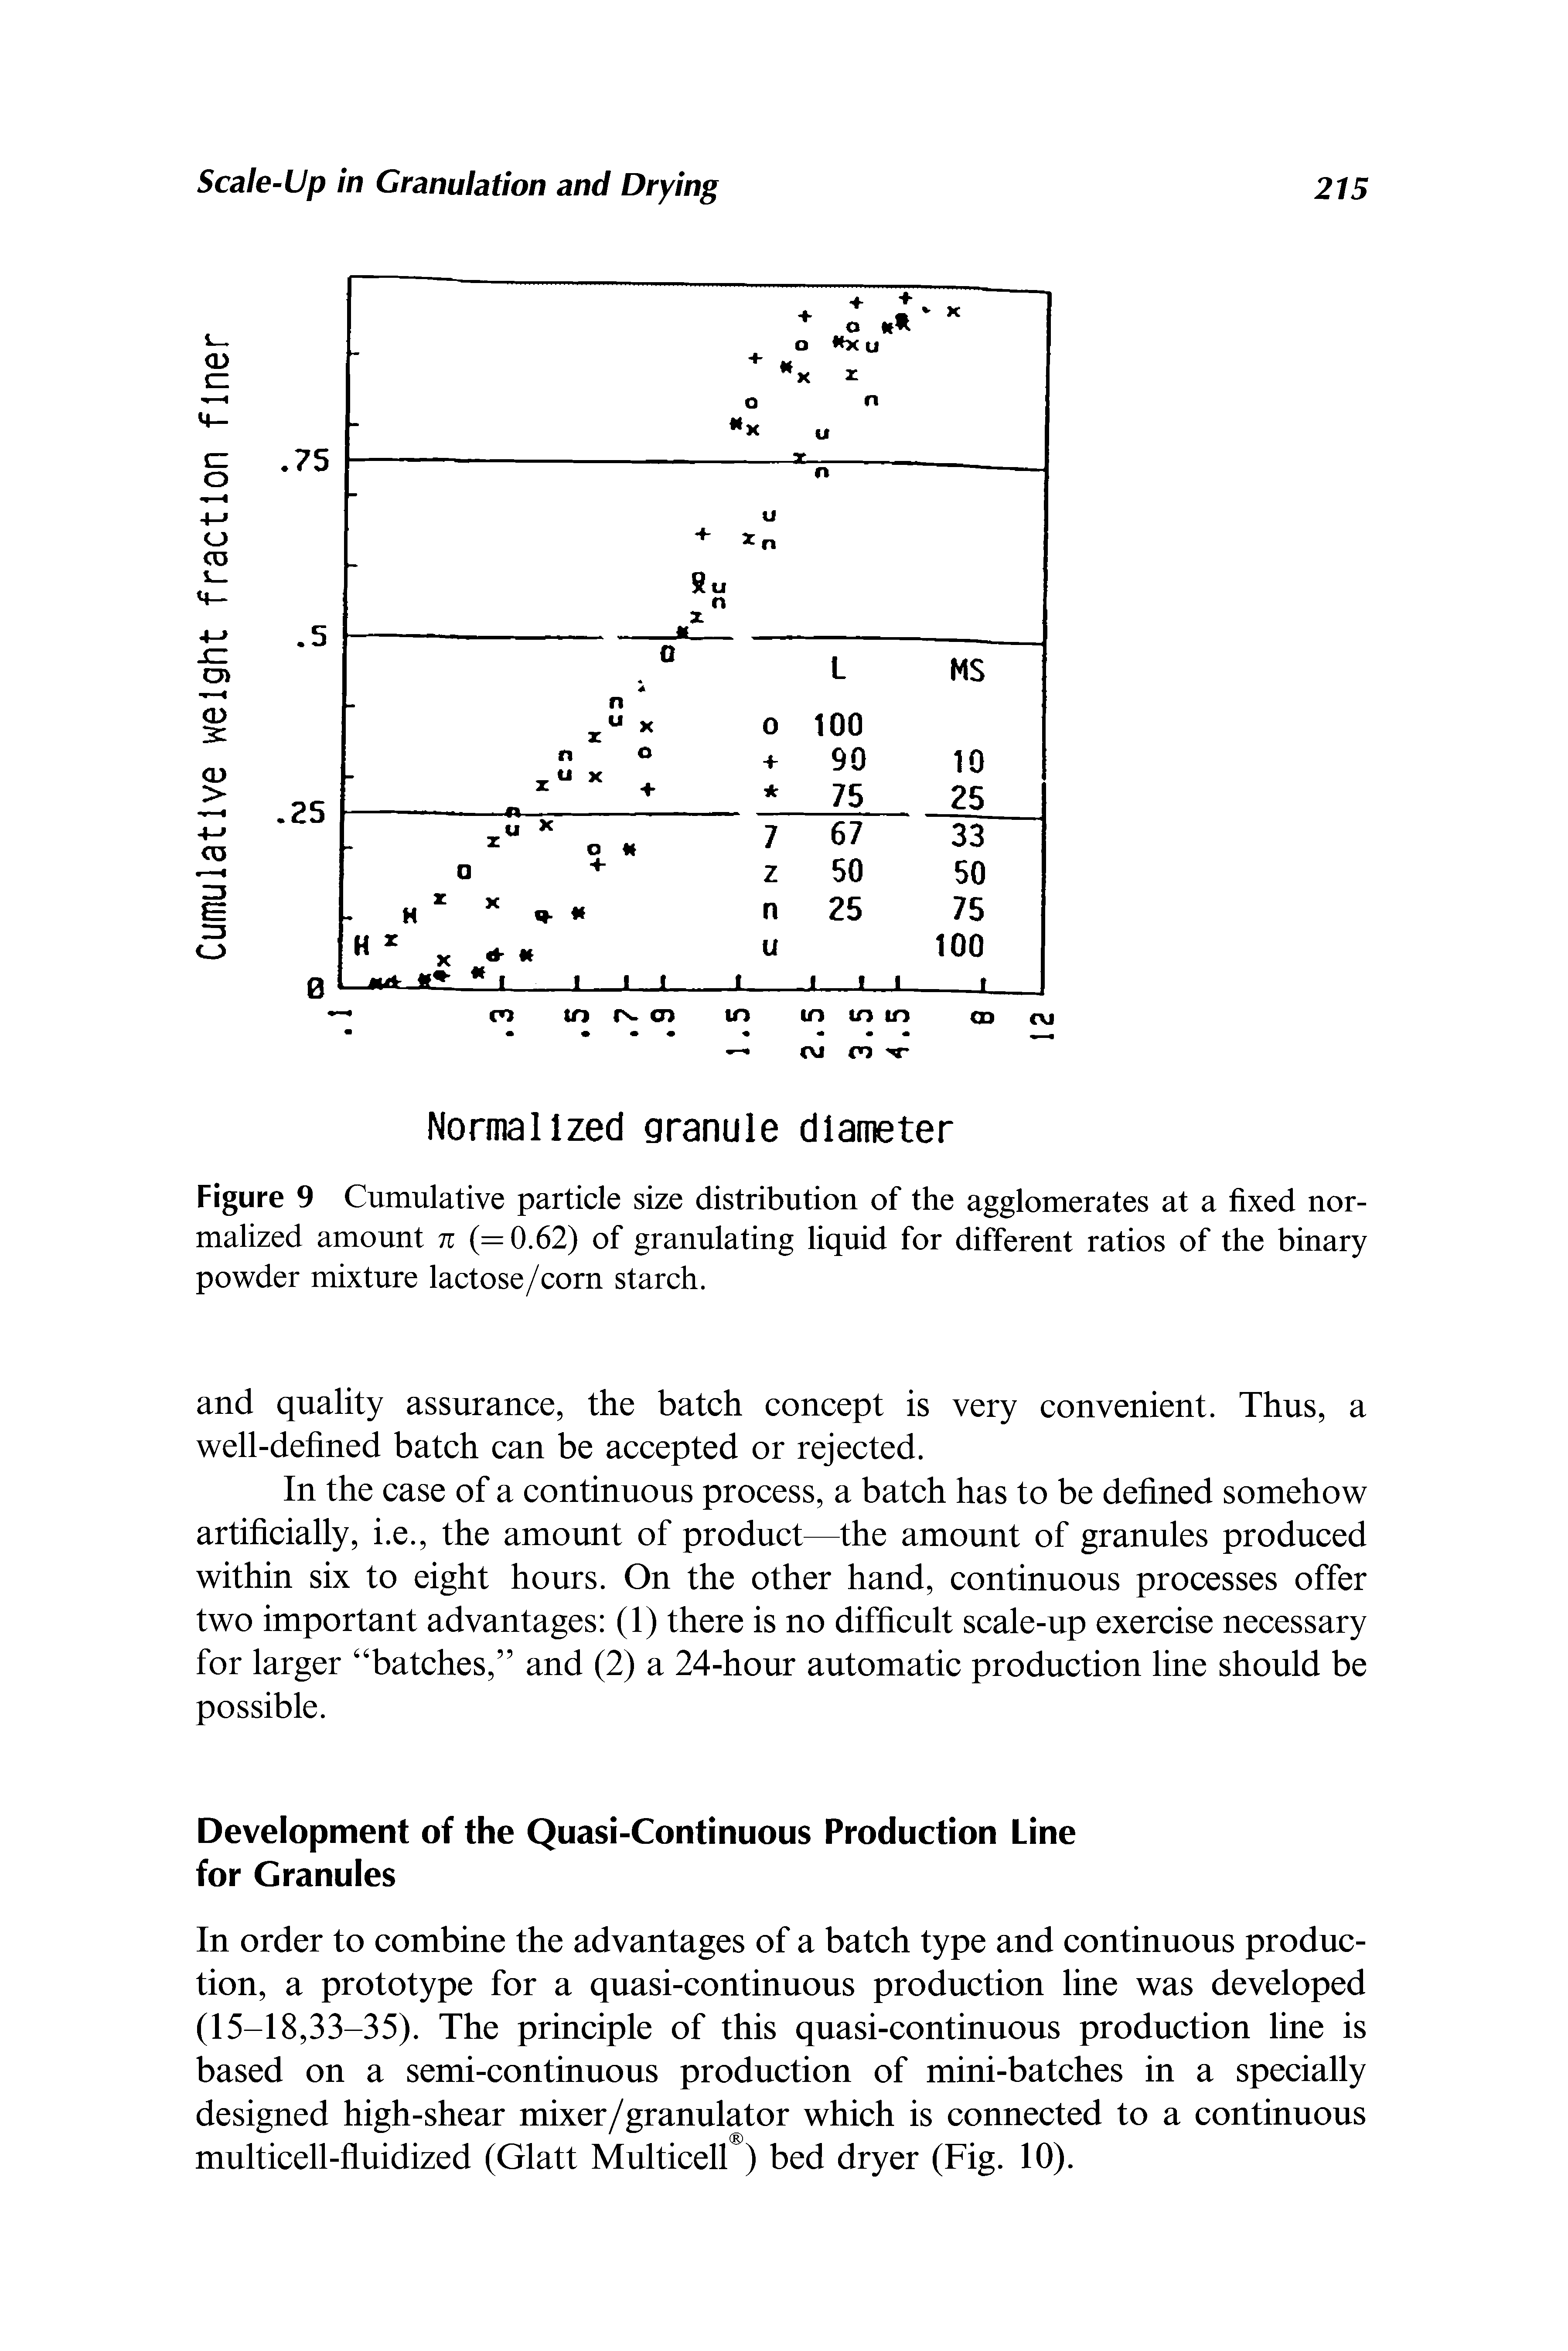 Figure 9 Cumulative particle size distribution of the agglomerates at a fixed normalized amount n (=0.62) of granulating liquid for different ratios of the binary powder mixture lactose/corn starch.